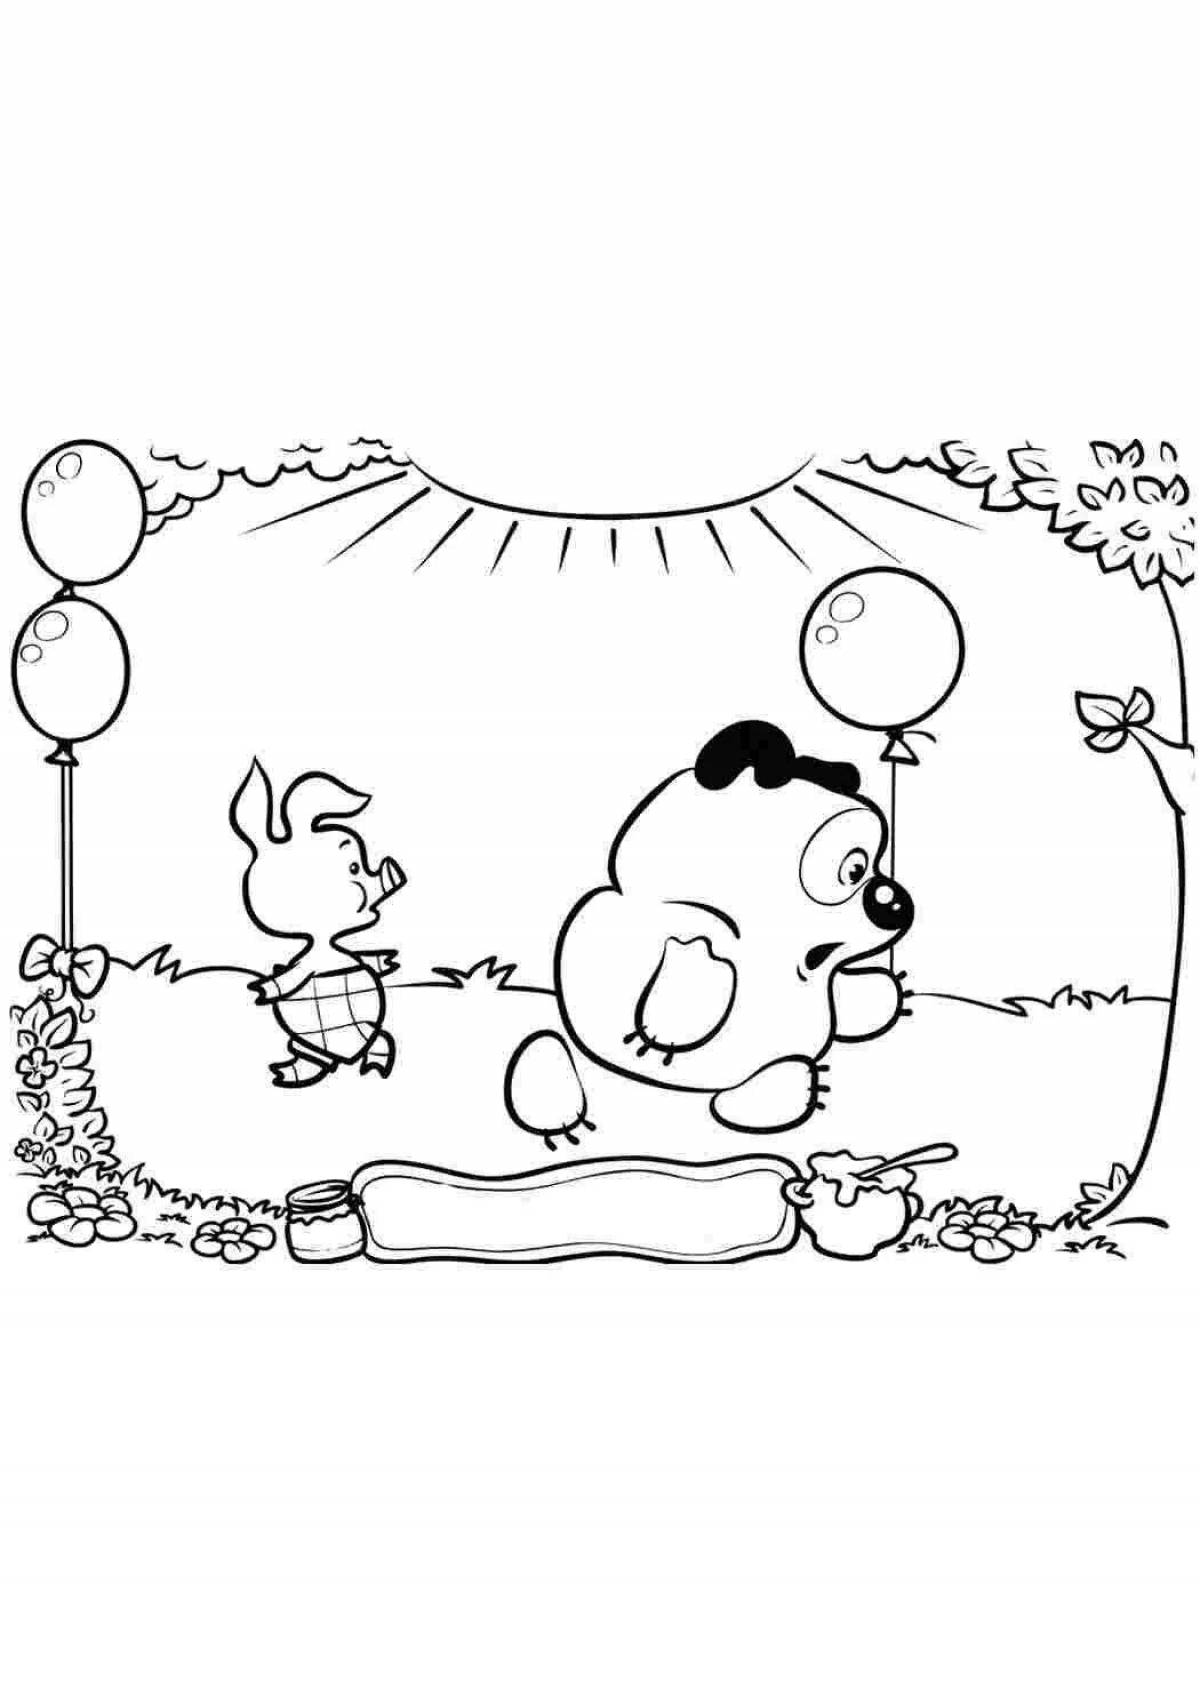 Energetic Winnie the Pooh with a balloon